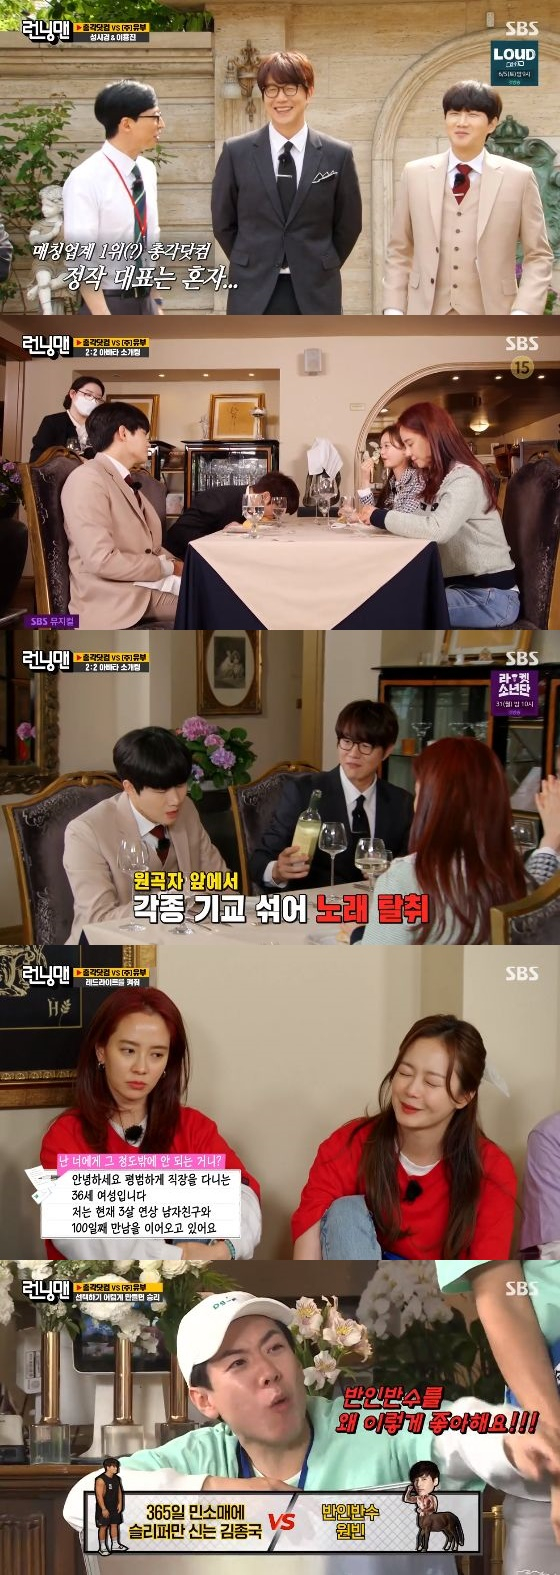 On the SBS entertainment program Running Man broadcasted on the afternoon of the 23rd, the married team and the unmarried teams Avatar blind date scene were drawn.The male members were divided into Joubu Co., Ltd. team and Ganggat.com team.The team leader of each team featured singer Sung Si-kyung and comedian Lee Yong-jin; the members were delighted to see the appearance of the two men who got out of the luxury vehicle.VIP customer Song Ji-hyo and Jeon So-mins ideal type 2 to 2 blind date was drawn.So the team leaders of each team, Sung Si-kyung and Lee Yong-jin, scrambled to blind date Avatar.Song Ji-hyo, the first blind date, was nervous, saying, I want to go home once I sit down.On the other hand, Jeon So-min welcomed the appearance of Sung Si-kyung as the first voice I heard.Running Man-vote Avatar blind date was full of big laughs; Sung Si-kyung inhaled Pasta with his face in a bowl.Lee Yong-jin also showed a personal performance of rocking dance to Kim Kyung Ho song.So Song Ji-hyo and Jeon So-min also ate Pasta with their faces on a plate.Lee Kwang-soo, on the blind date, said, This is an animal farm, what blind date is it?Meanwhile, Song Ji-hyo and Jeon So-min spoke of the marriage view; Song Ji-hyo said: I dont want marriage to be the purpose.Lee Sang-hyung said, Im sorry, man who knows how to do it. Then, Jeon So-min also agreed, Marriage seems to be a reality.After the blind date, Jeon So-min and Song Ji-hyo gave a generous score to the bachelor.com team, saying, Sung Si-kyungs reversal charm was so funny.The next mission was to discuss the relationship between Running Man and the woman, who was 36 years old, who was arguing with her boyfriend during the meeting cycle.Sung Si-kyung, a MC of Witch Hunting, introduced the story. Sung Si-kyung made members sympathize with the introduction of the story that seemed to represent the heart of the story.Lee Yong-jin and Yang Se-chan said, I know all the love affairs of each other. Lee Yong-jin said, Mr. Sechan has been dating for a while now.Yang Se-chan said, I want to talk to you, but I am patient because of my sister-in-law. The balance game was held as the last mission to grasp the ideal type of Song Ji-hyo and Jeon So-min.The members laughed at the half-in-one Lee Hoon and Won Bin, who has moths from his mouth in order to match the fair balance with the handsome actors.